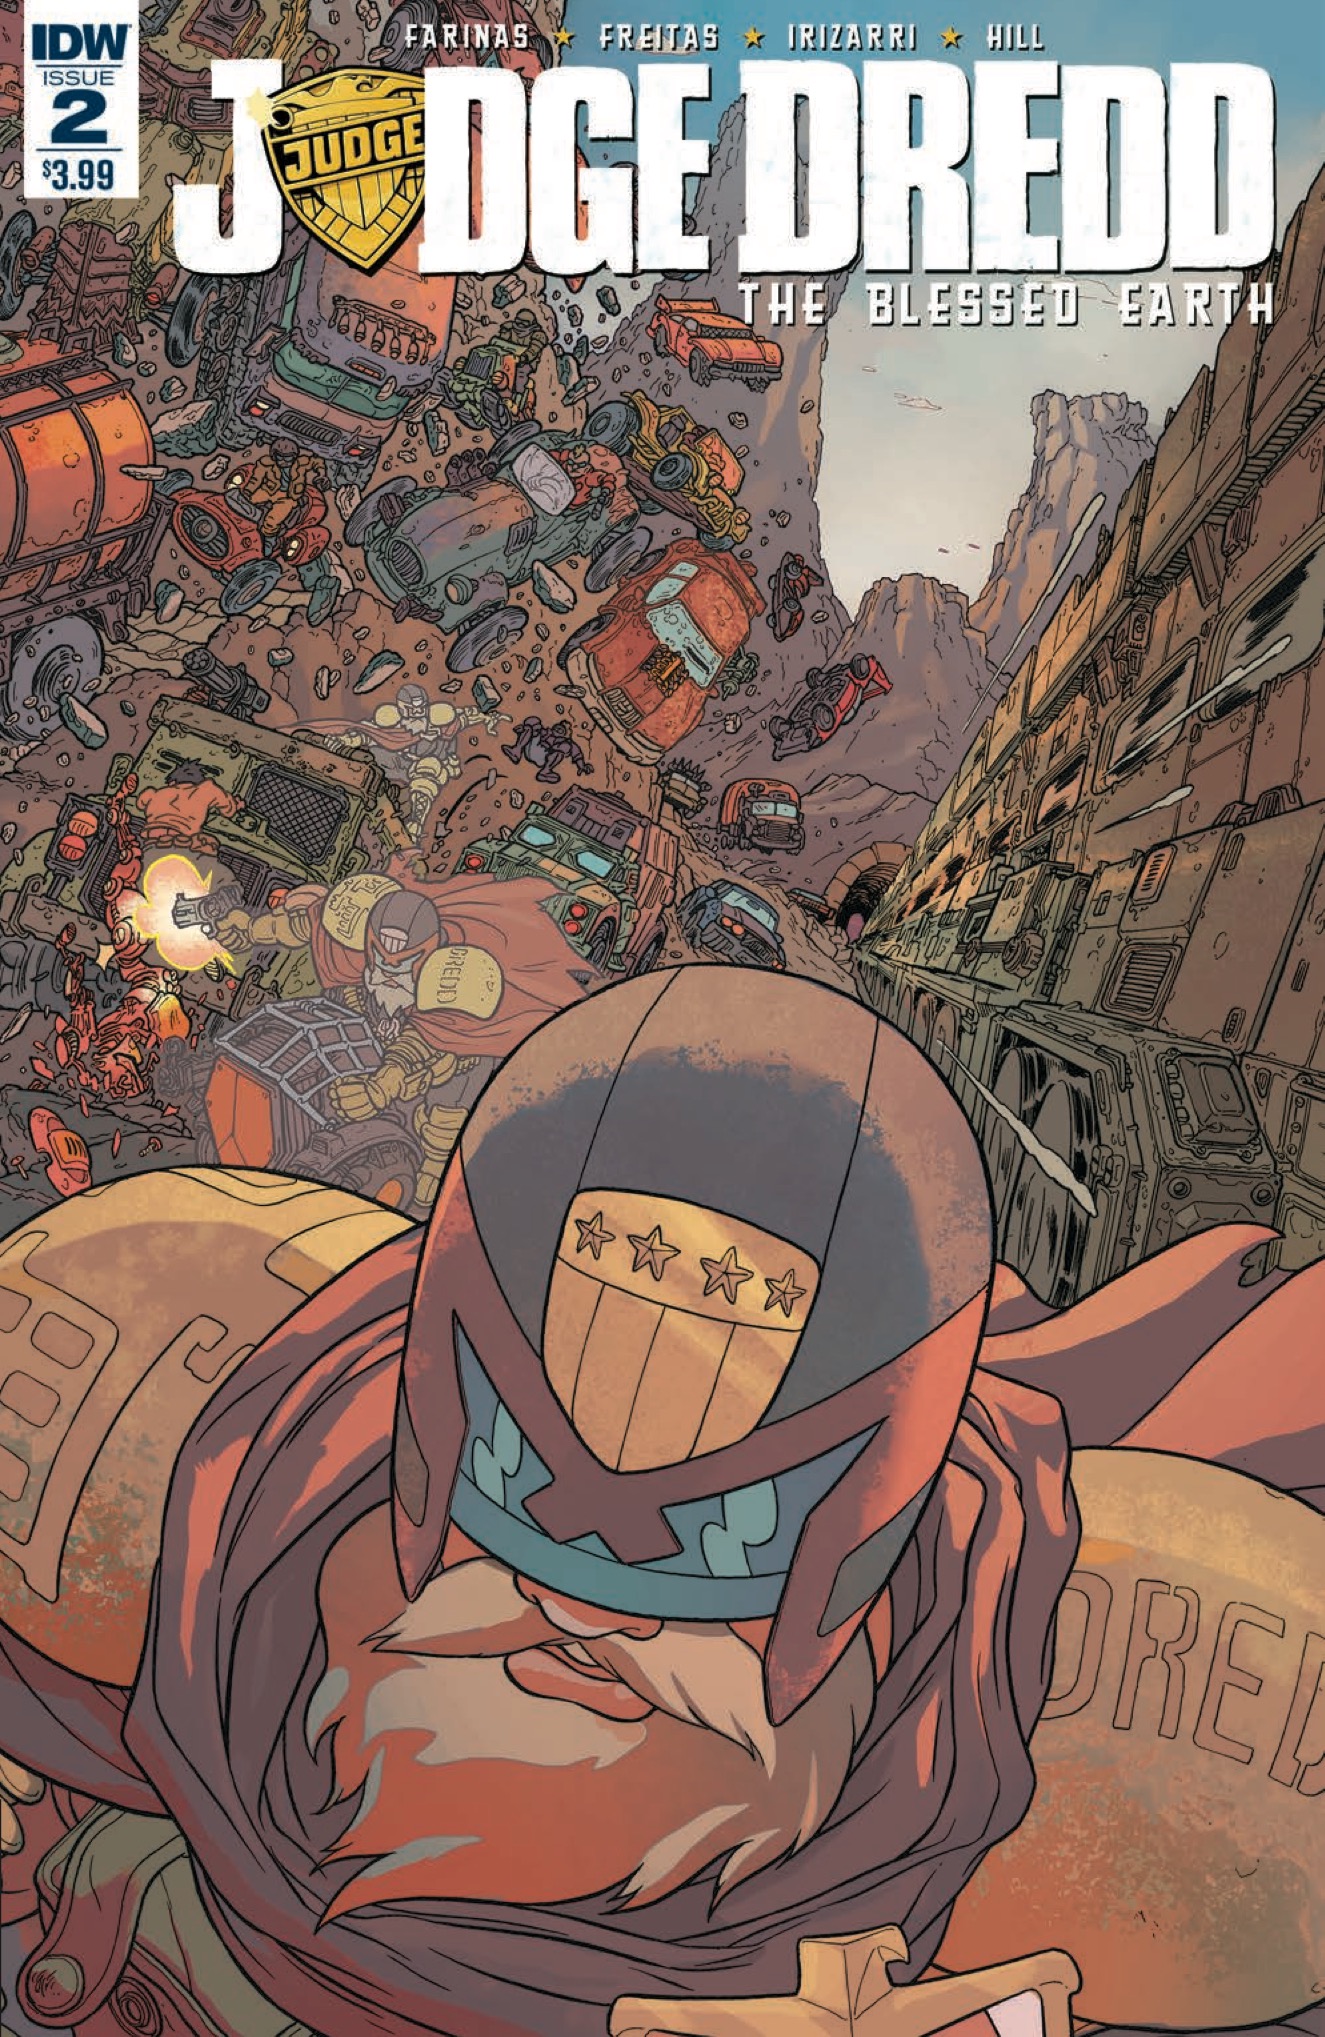 [EXCLUSIVE] IDW Preview: Judge Dredd: The Blessed Earth #2